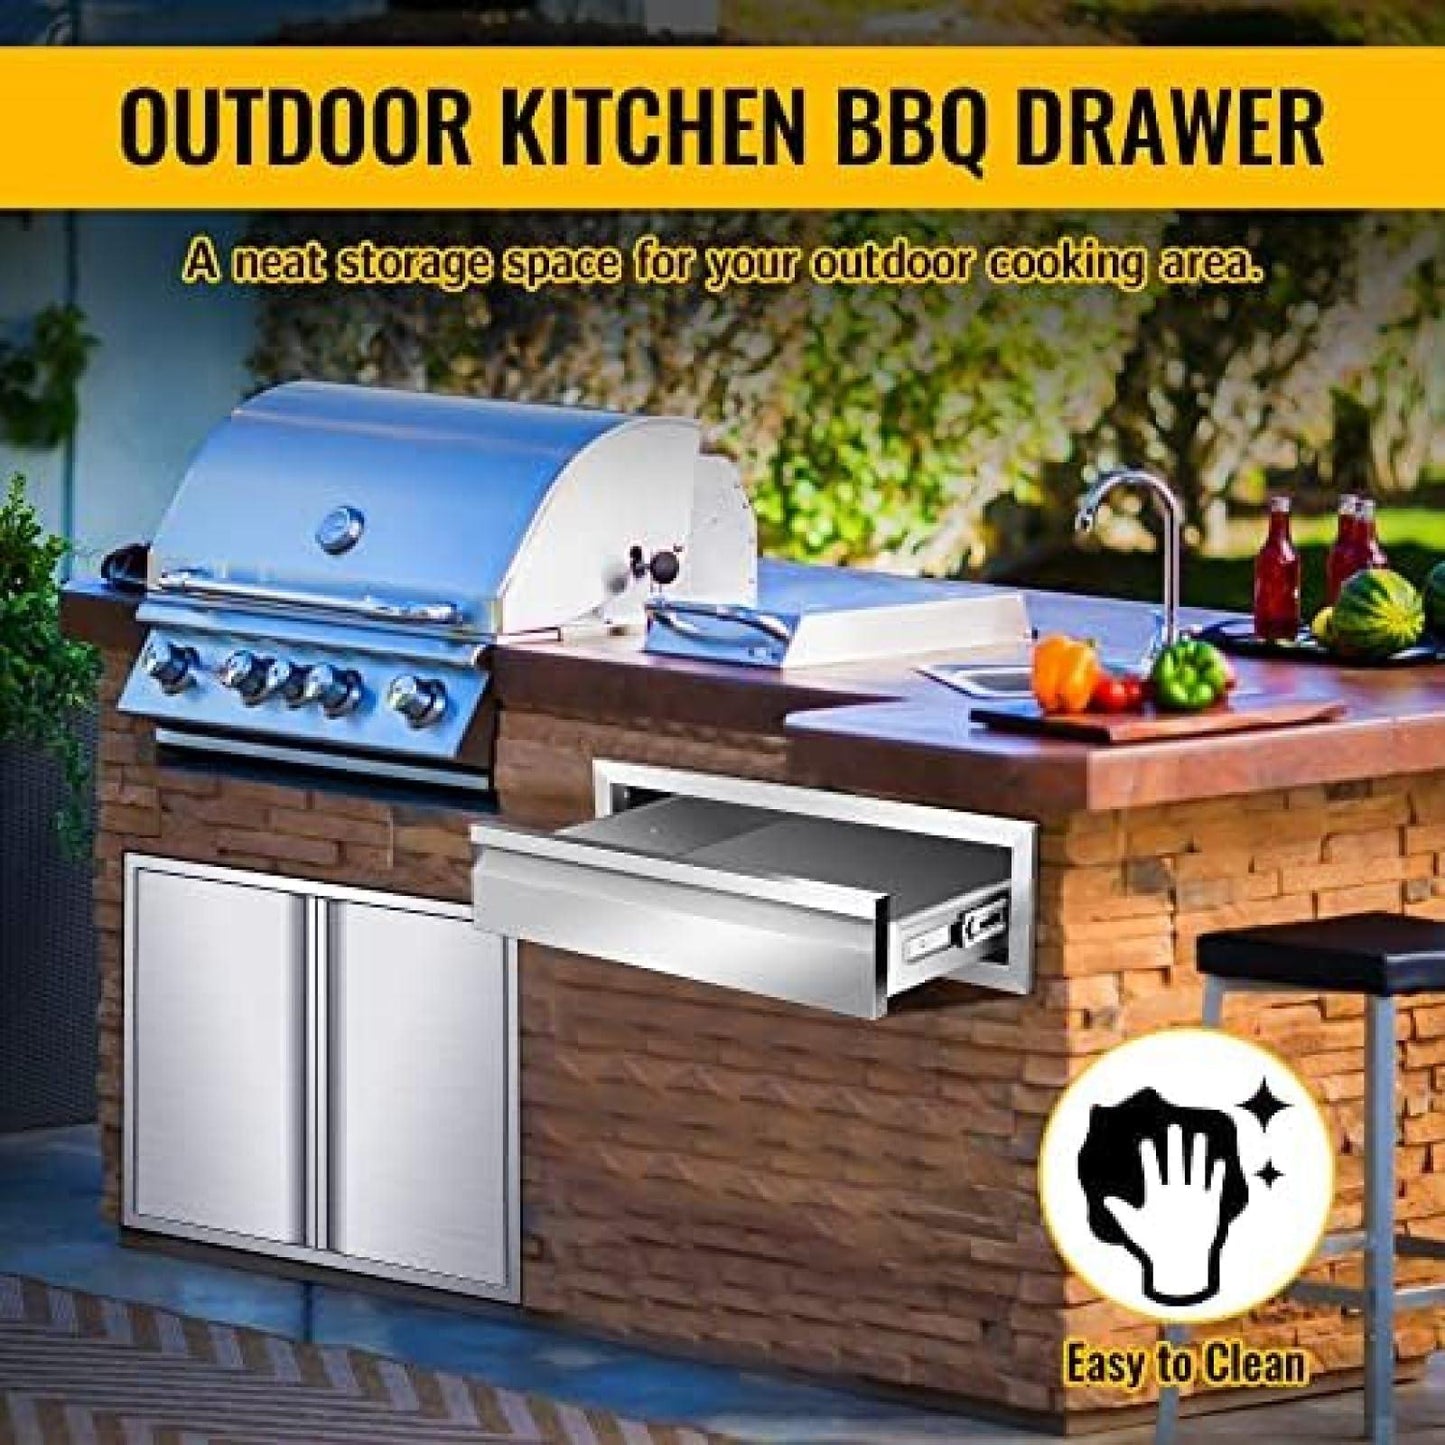 Outdoor Kitchen Drawers, Flush Mount Double BBQ Access Drawers Stainless Steel with Recessed Handle, BBQ Island Drawers for Outdoor Kitchens Or Grill Station,-24W X 6.5H X 23D Inch - CookCave